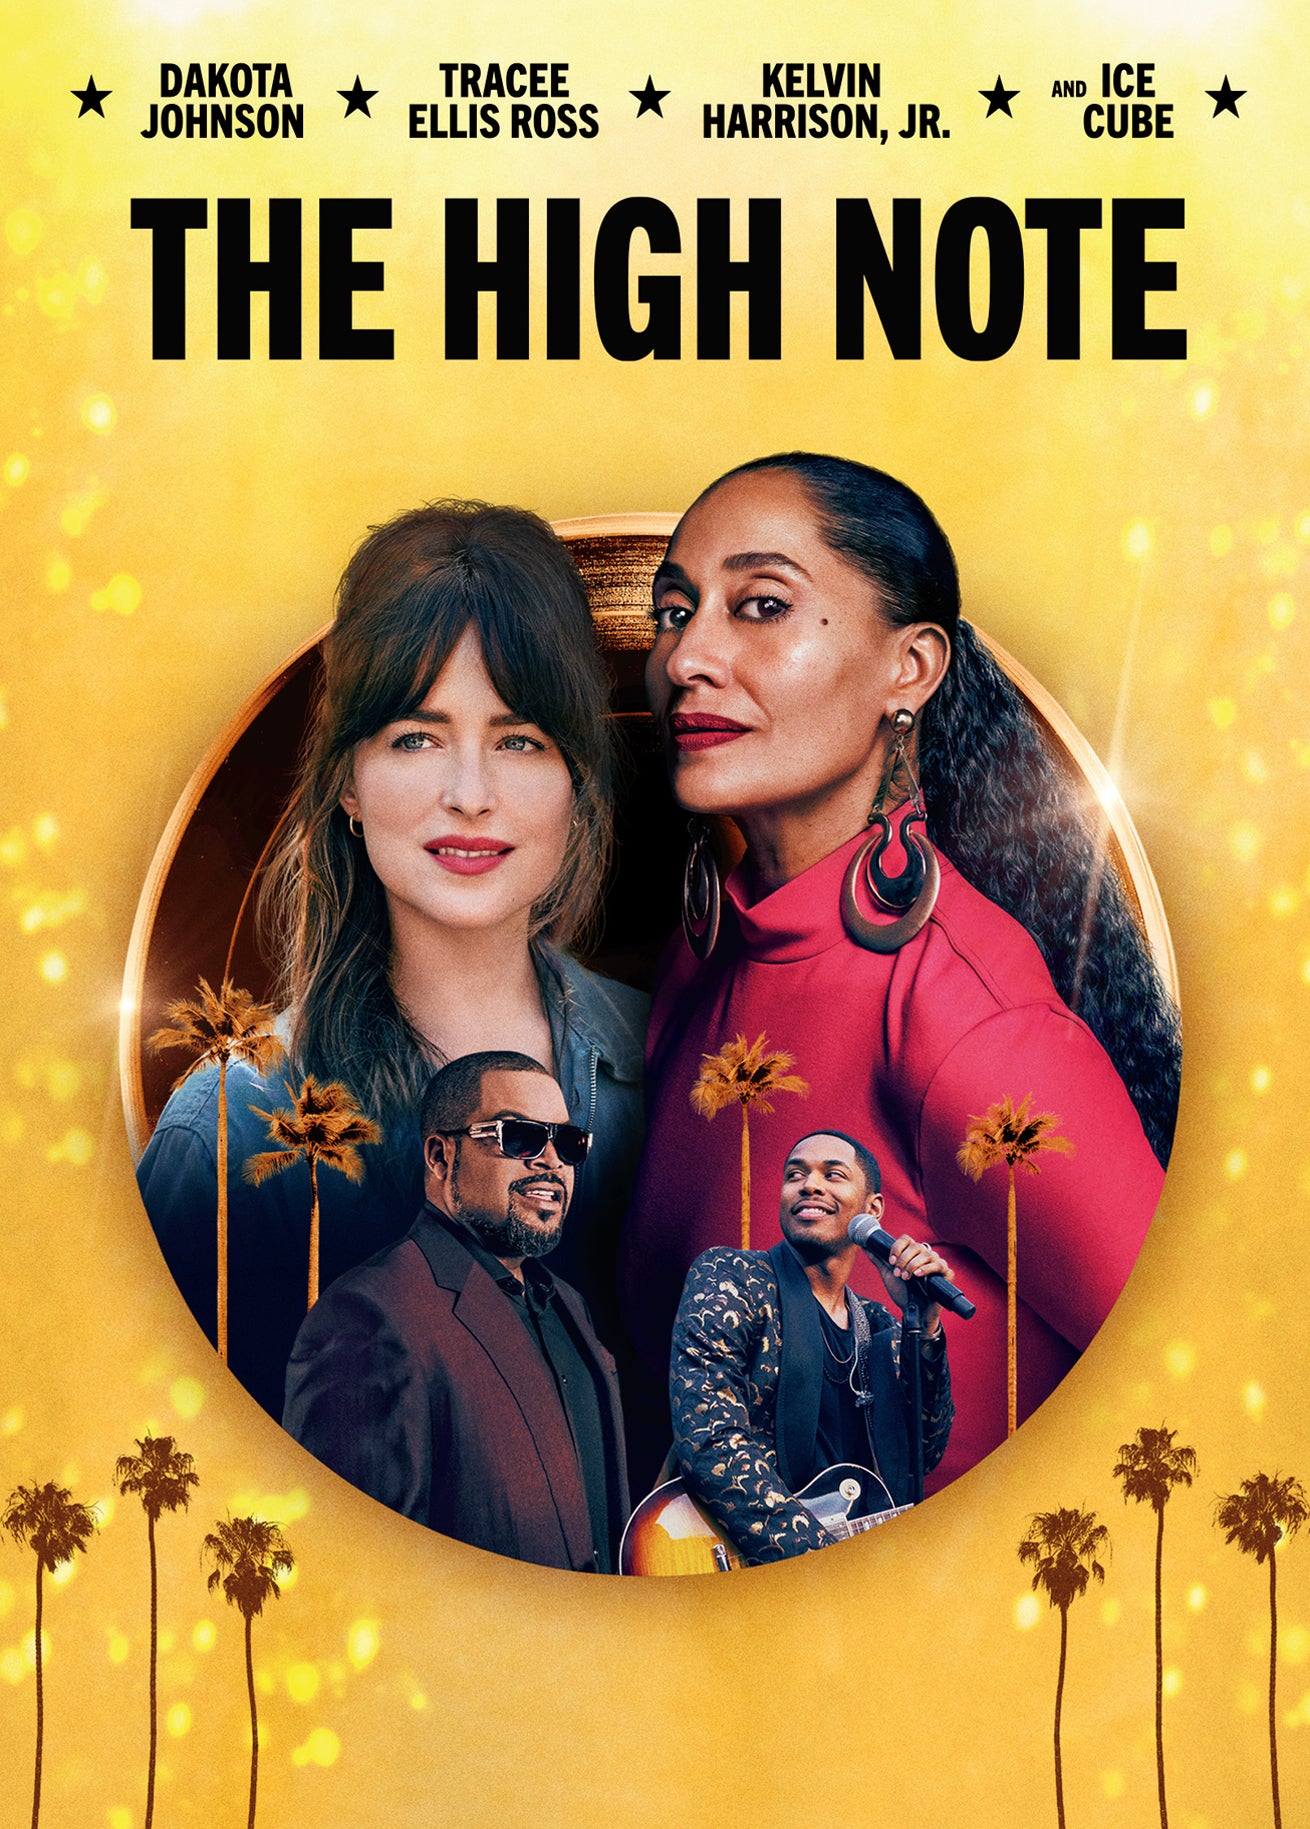 High Note cover art